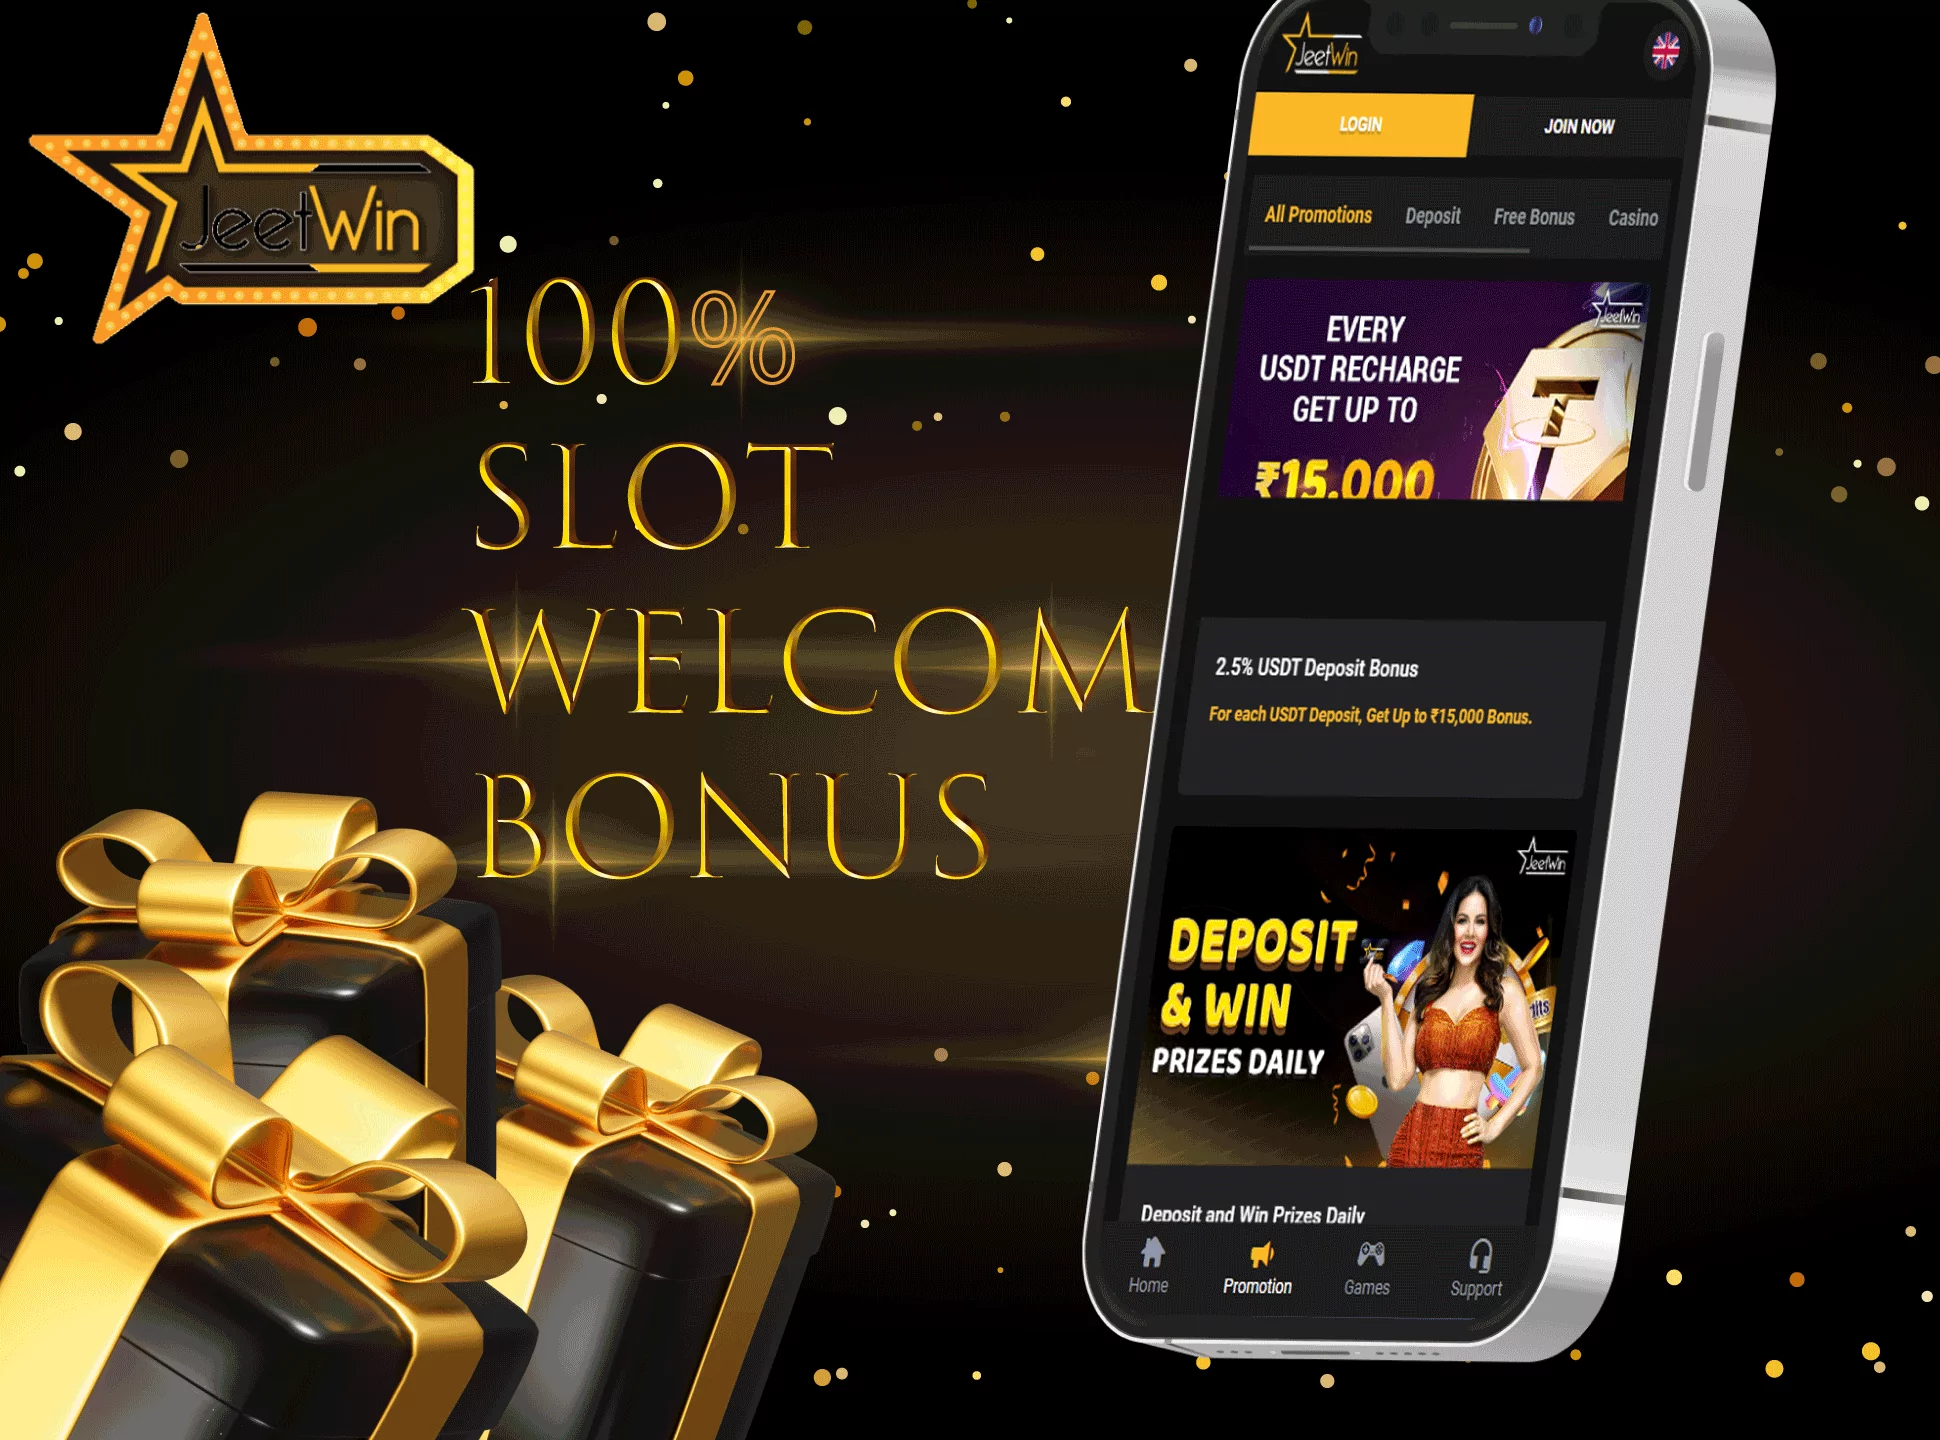 Receive up to 20,000 INR and spend it in slots.